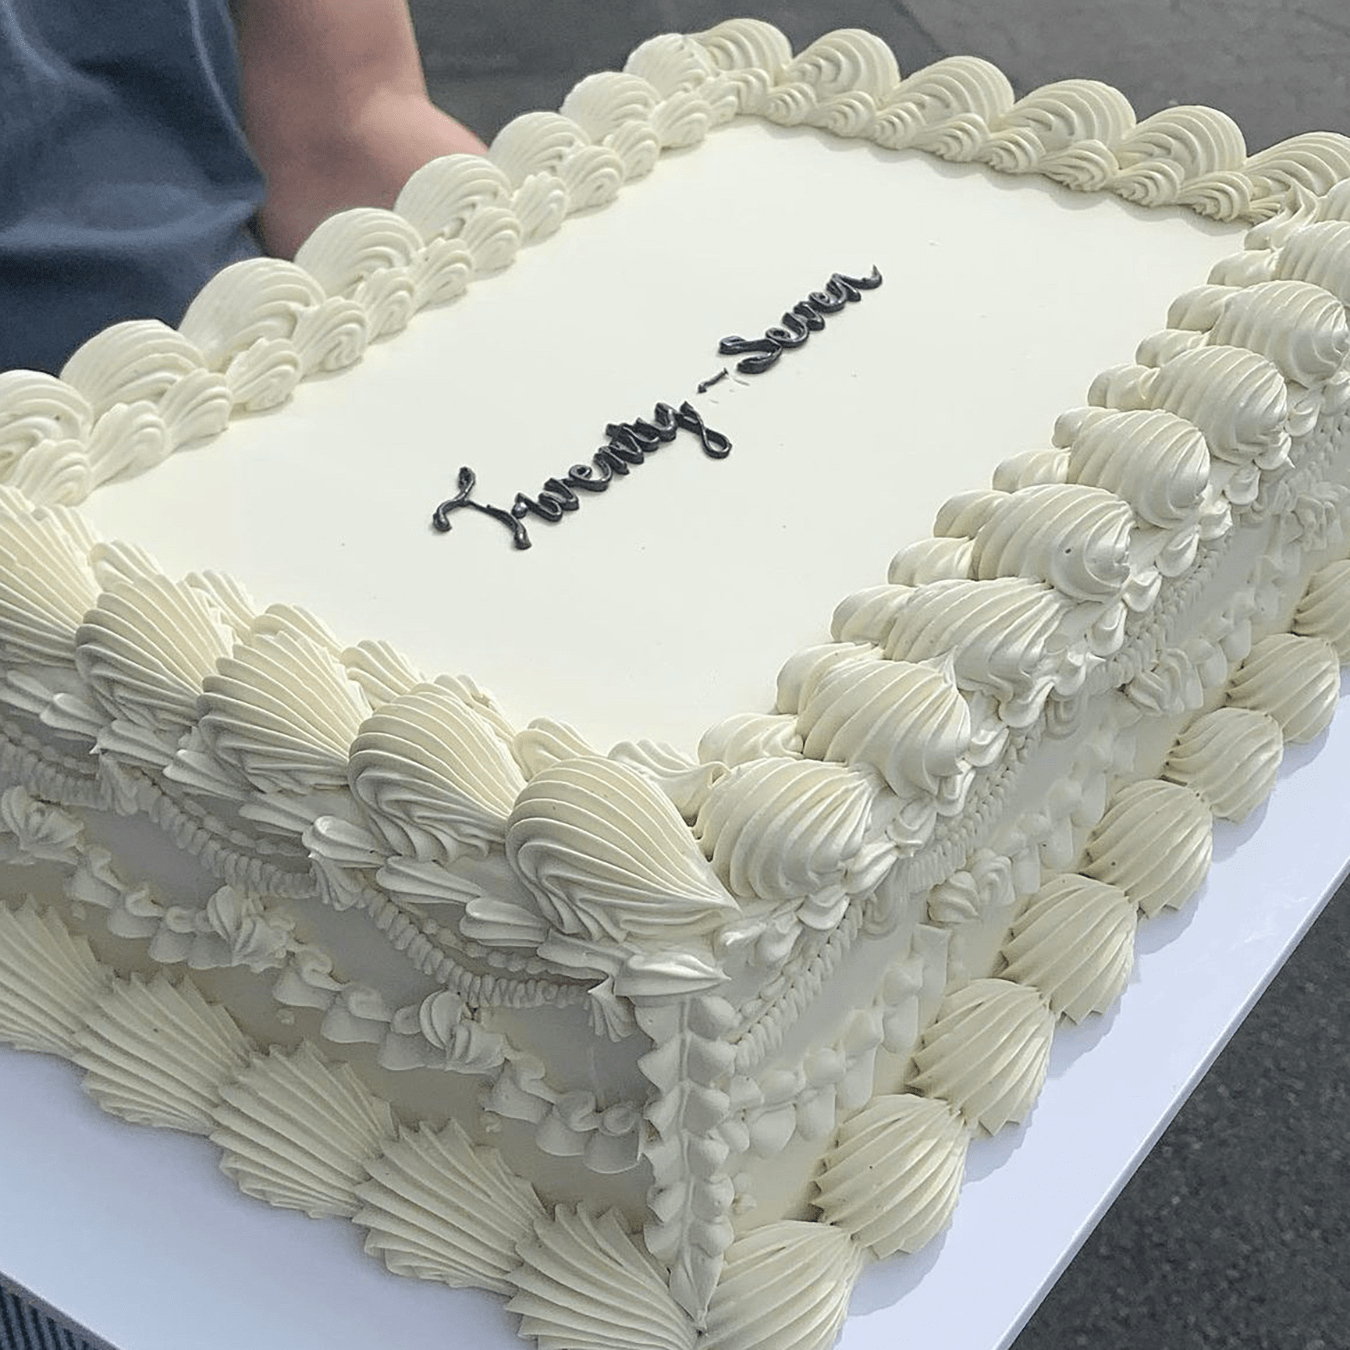 A very large vintage style sheet all white slab-cake covered in a white Swiss meringue buttercream with intricate ornate piping.  Big enough to feed a crowd or party for any birthday or wedding celebration.